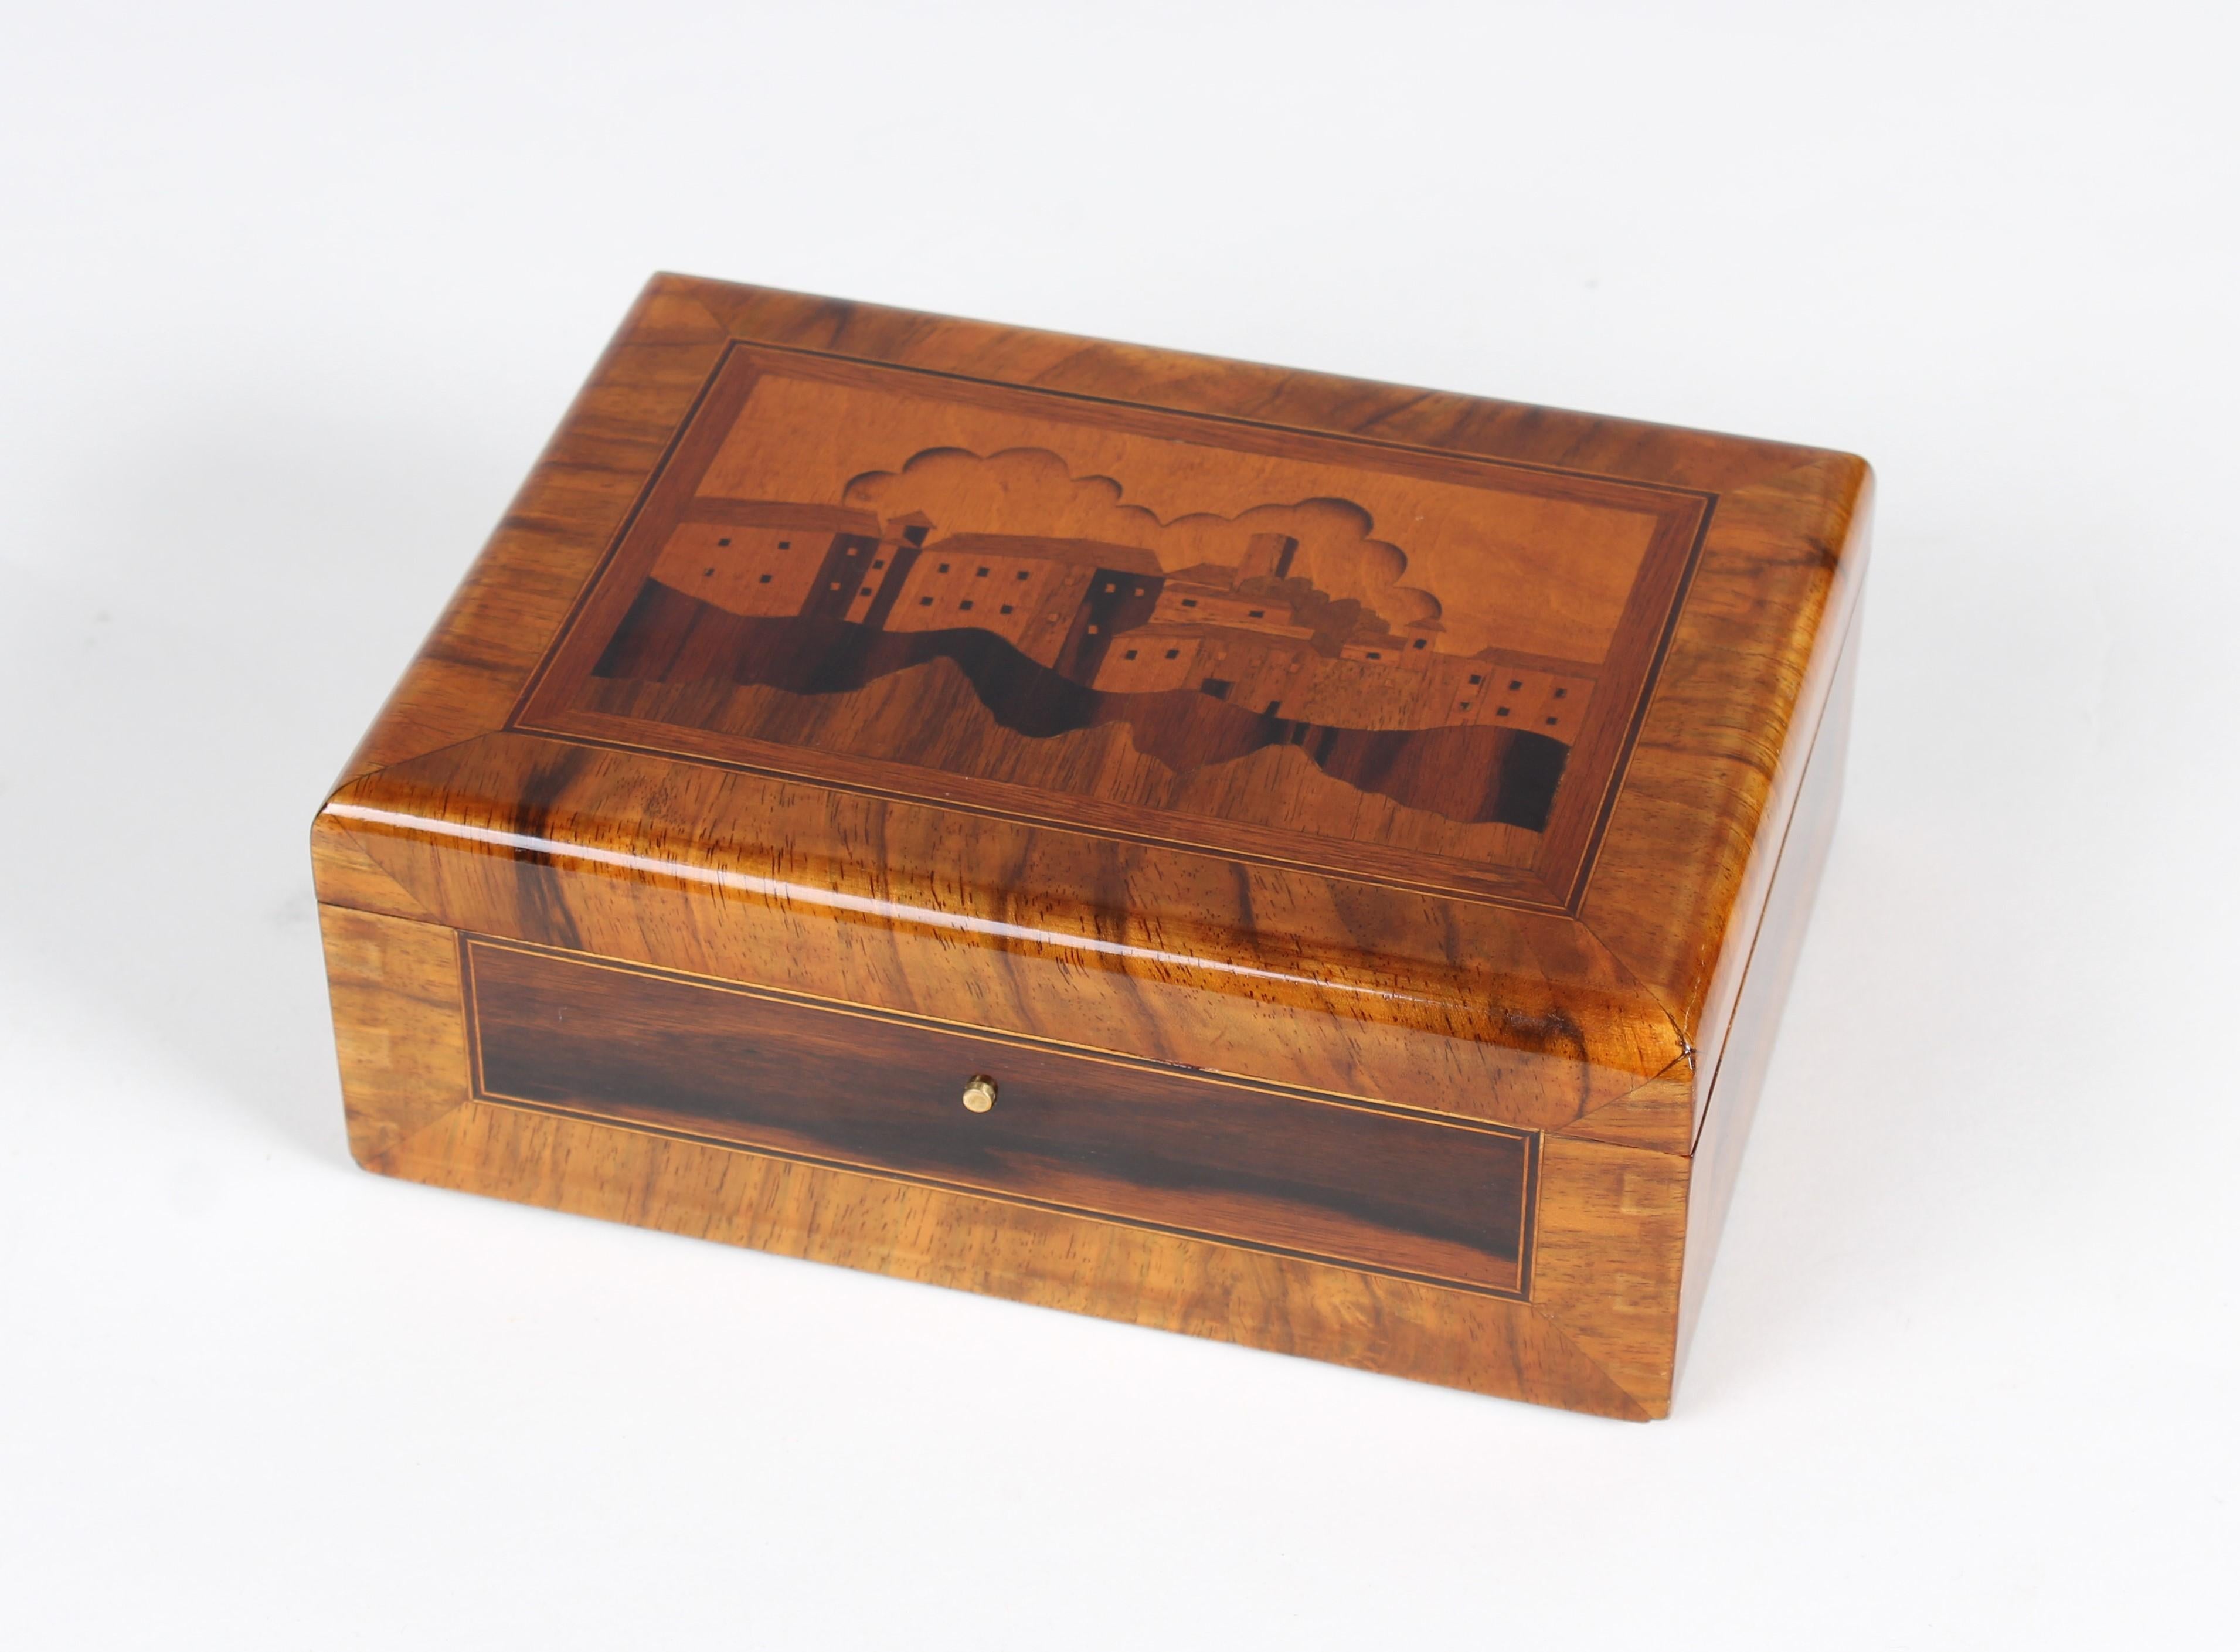 Small wooden box

Germany
Walnut and other precious woods
Middle of the 20th century.

dimensions: h x w x d: 7 x 19 x 14 cm

Description:
Small box with beautiful Marquetry. Inlayed is a scene of a coastal town.

Restored and shellac